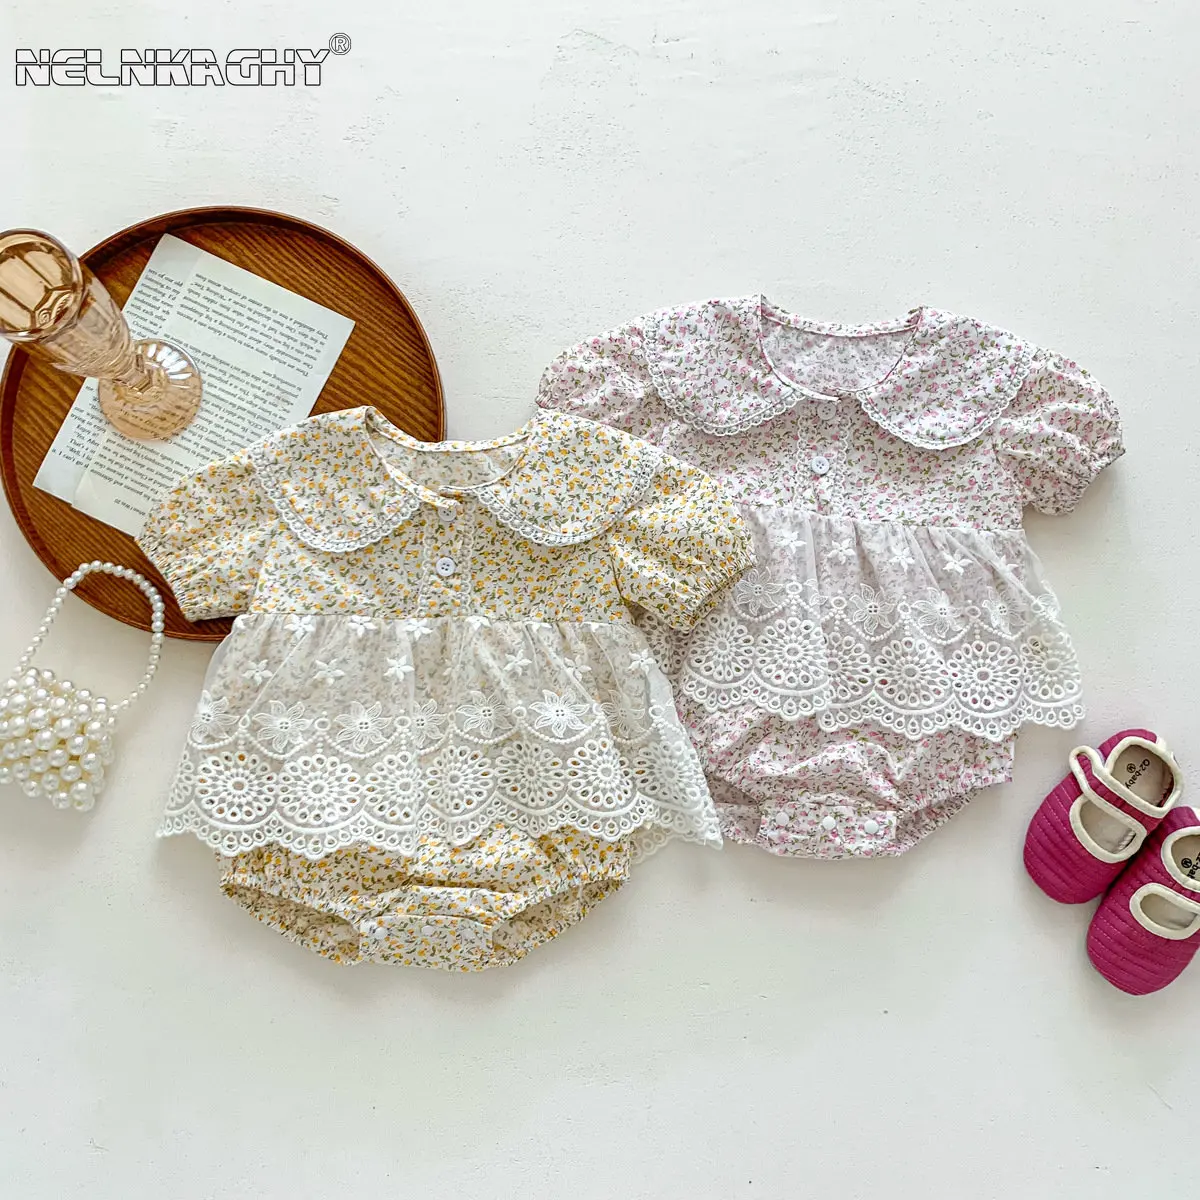 2023 NEW IN Summer Kids Girls Short Sleeve Floral Peter Pan Collar Patchwork Lace Jumpsuits Infant Newborn Baby Bodysuit 유아복